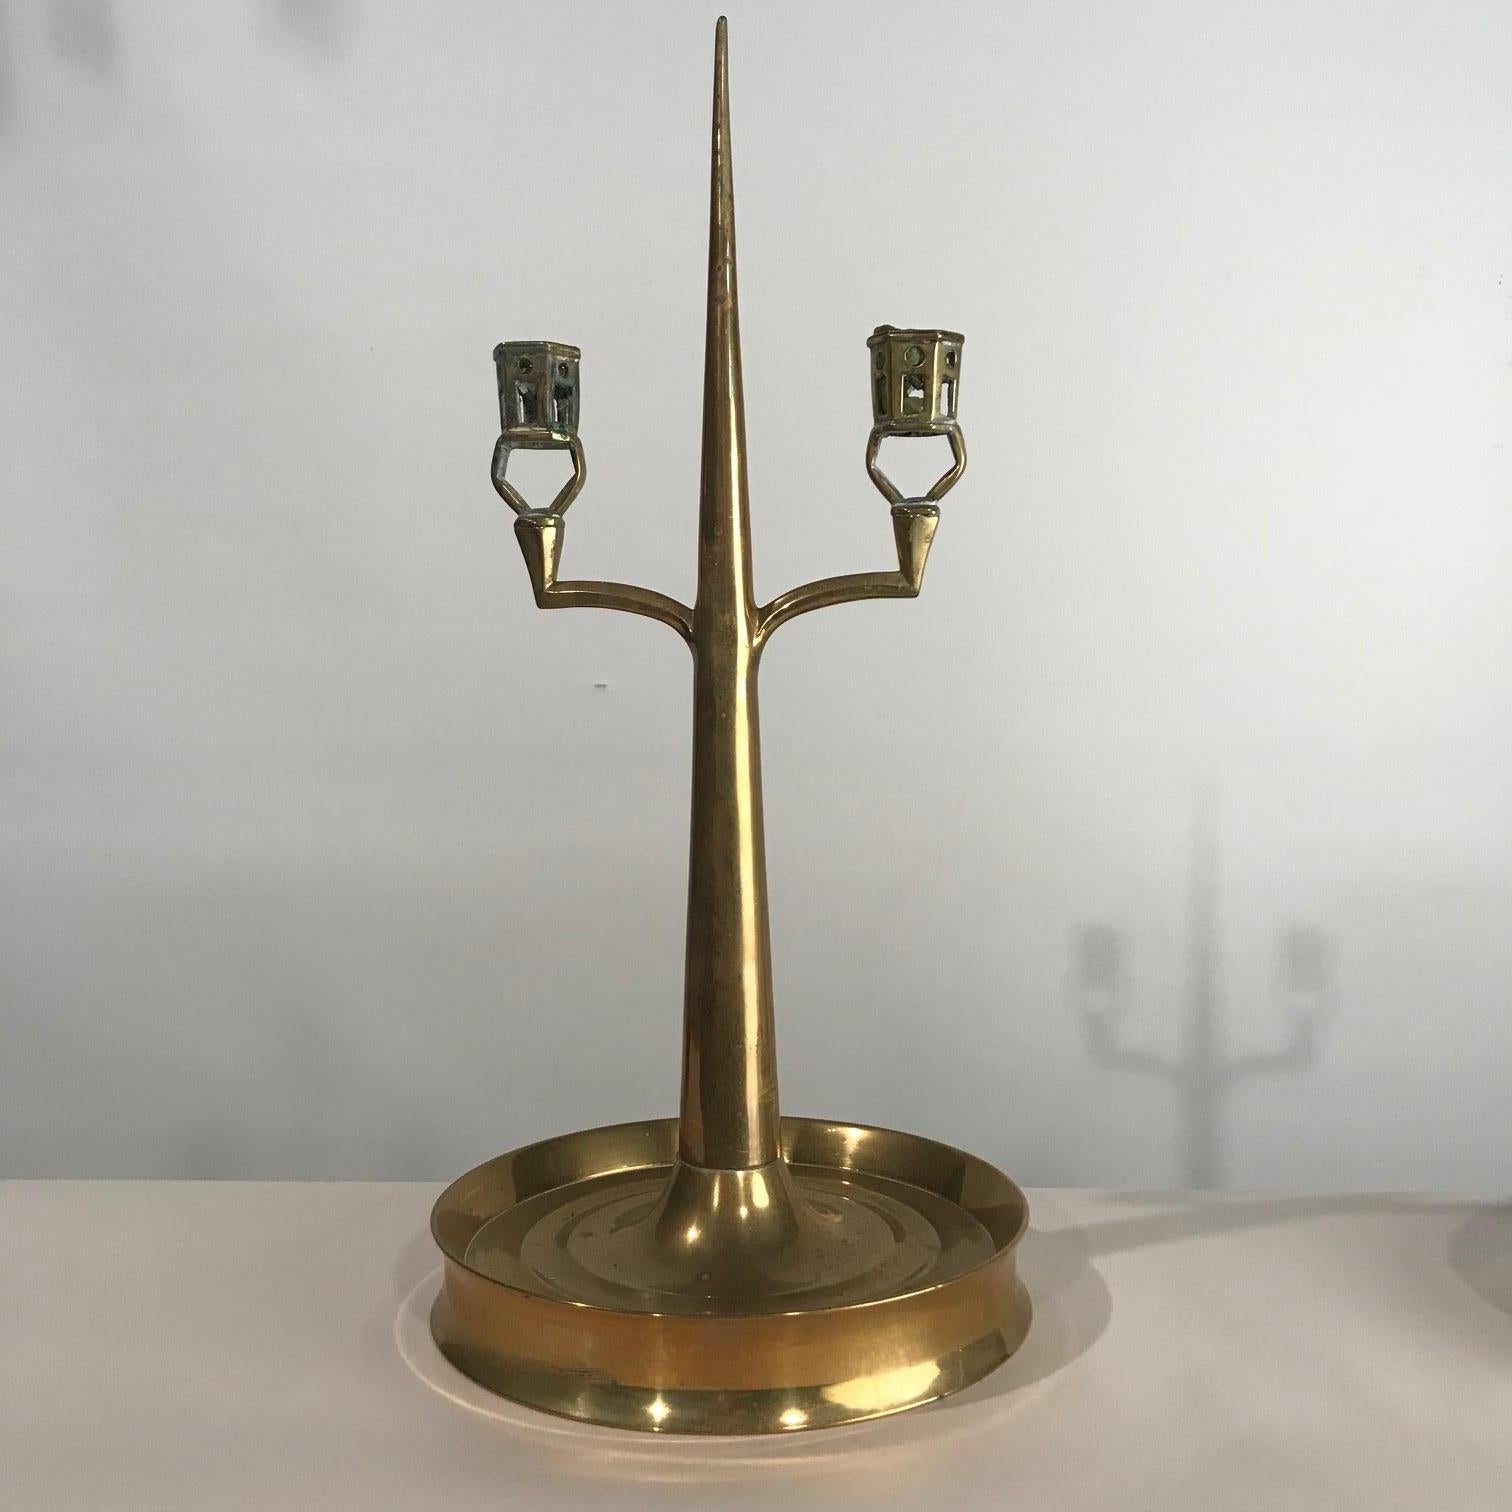 This unusual pair combine an Arts & Crafts sensibility with a Gothic twist. Each tapering central spire supports a pair of pierced hexagonal open candleholders. The round base is turned and dished. This pair has been made by a skilled metalworker in